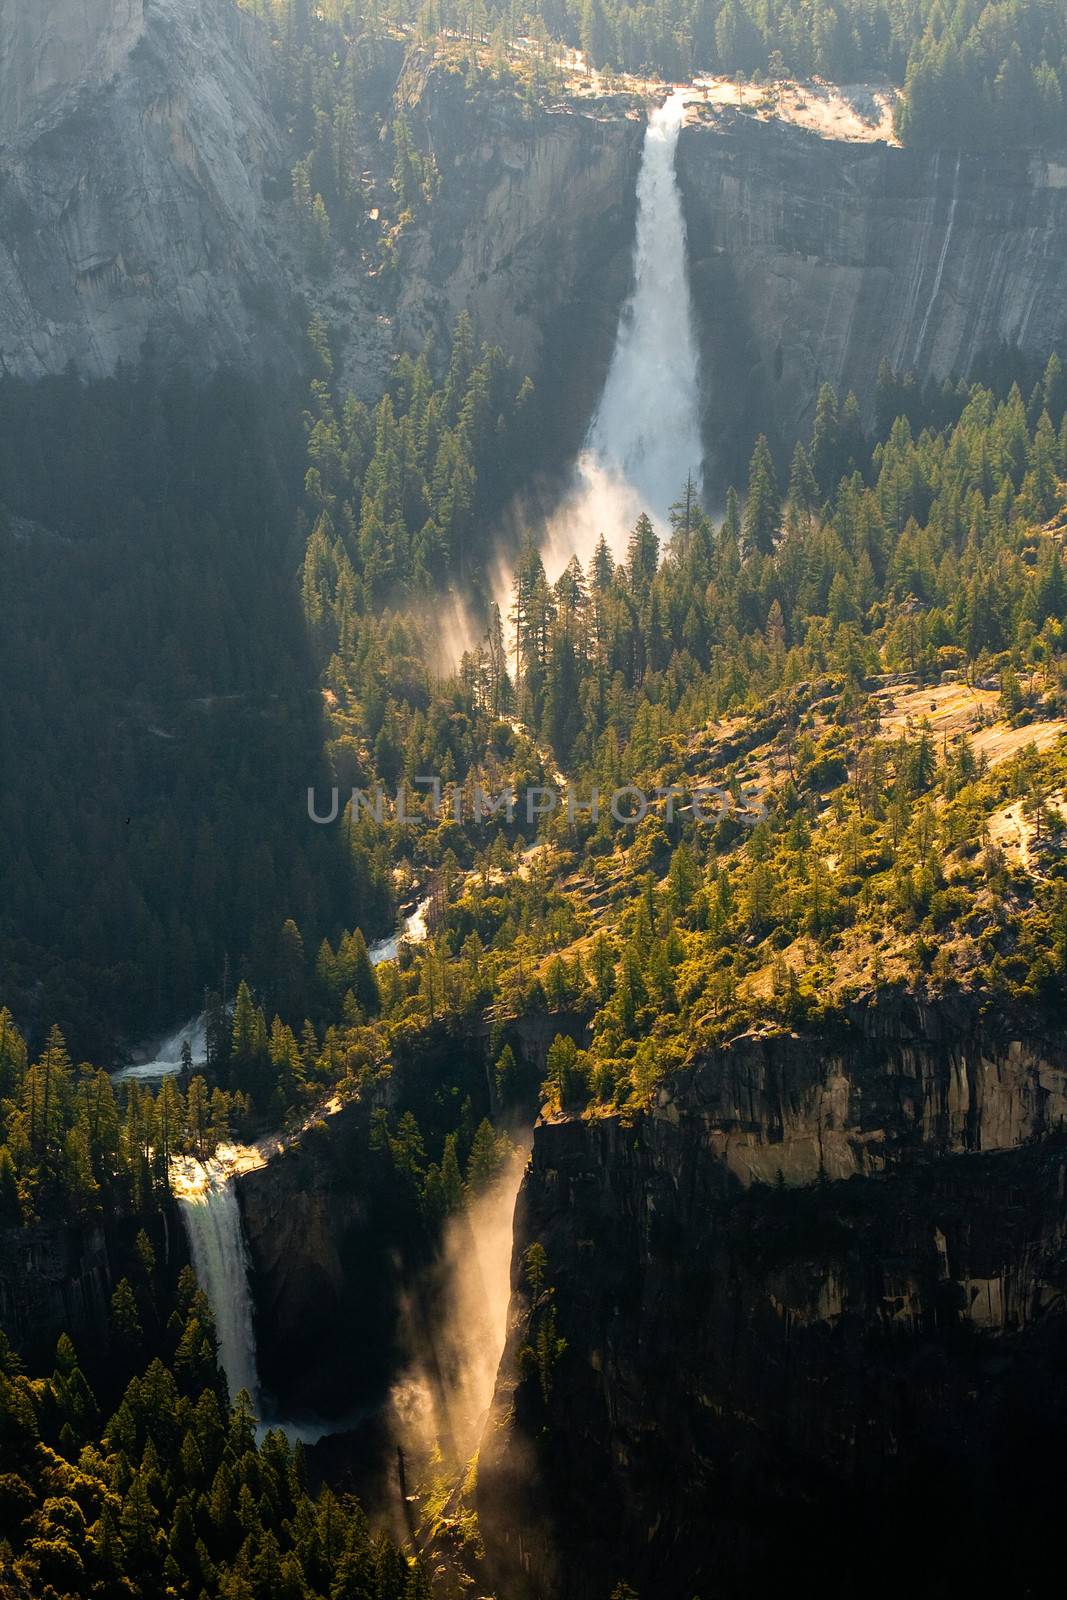 Scenic view of waterfall viewed from Glacier Point in Yosemite National Park, California, U.S.A.